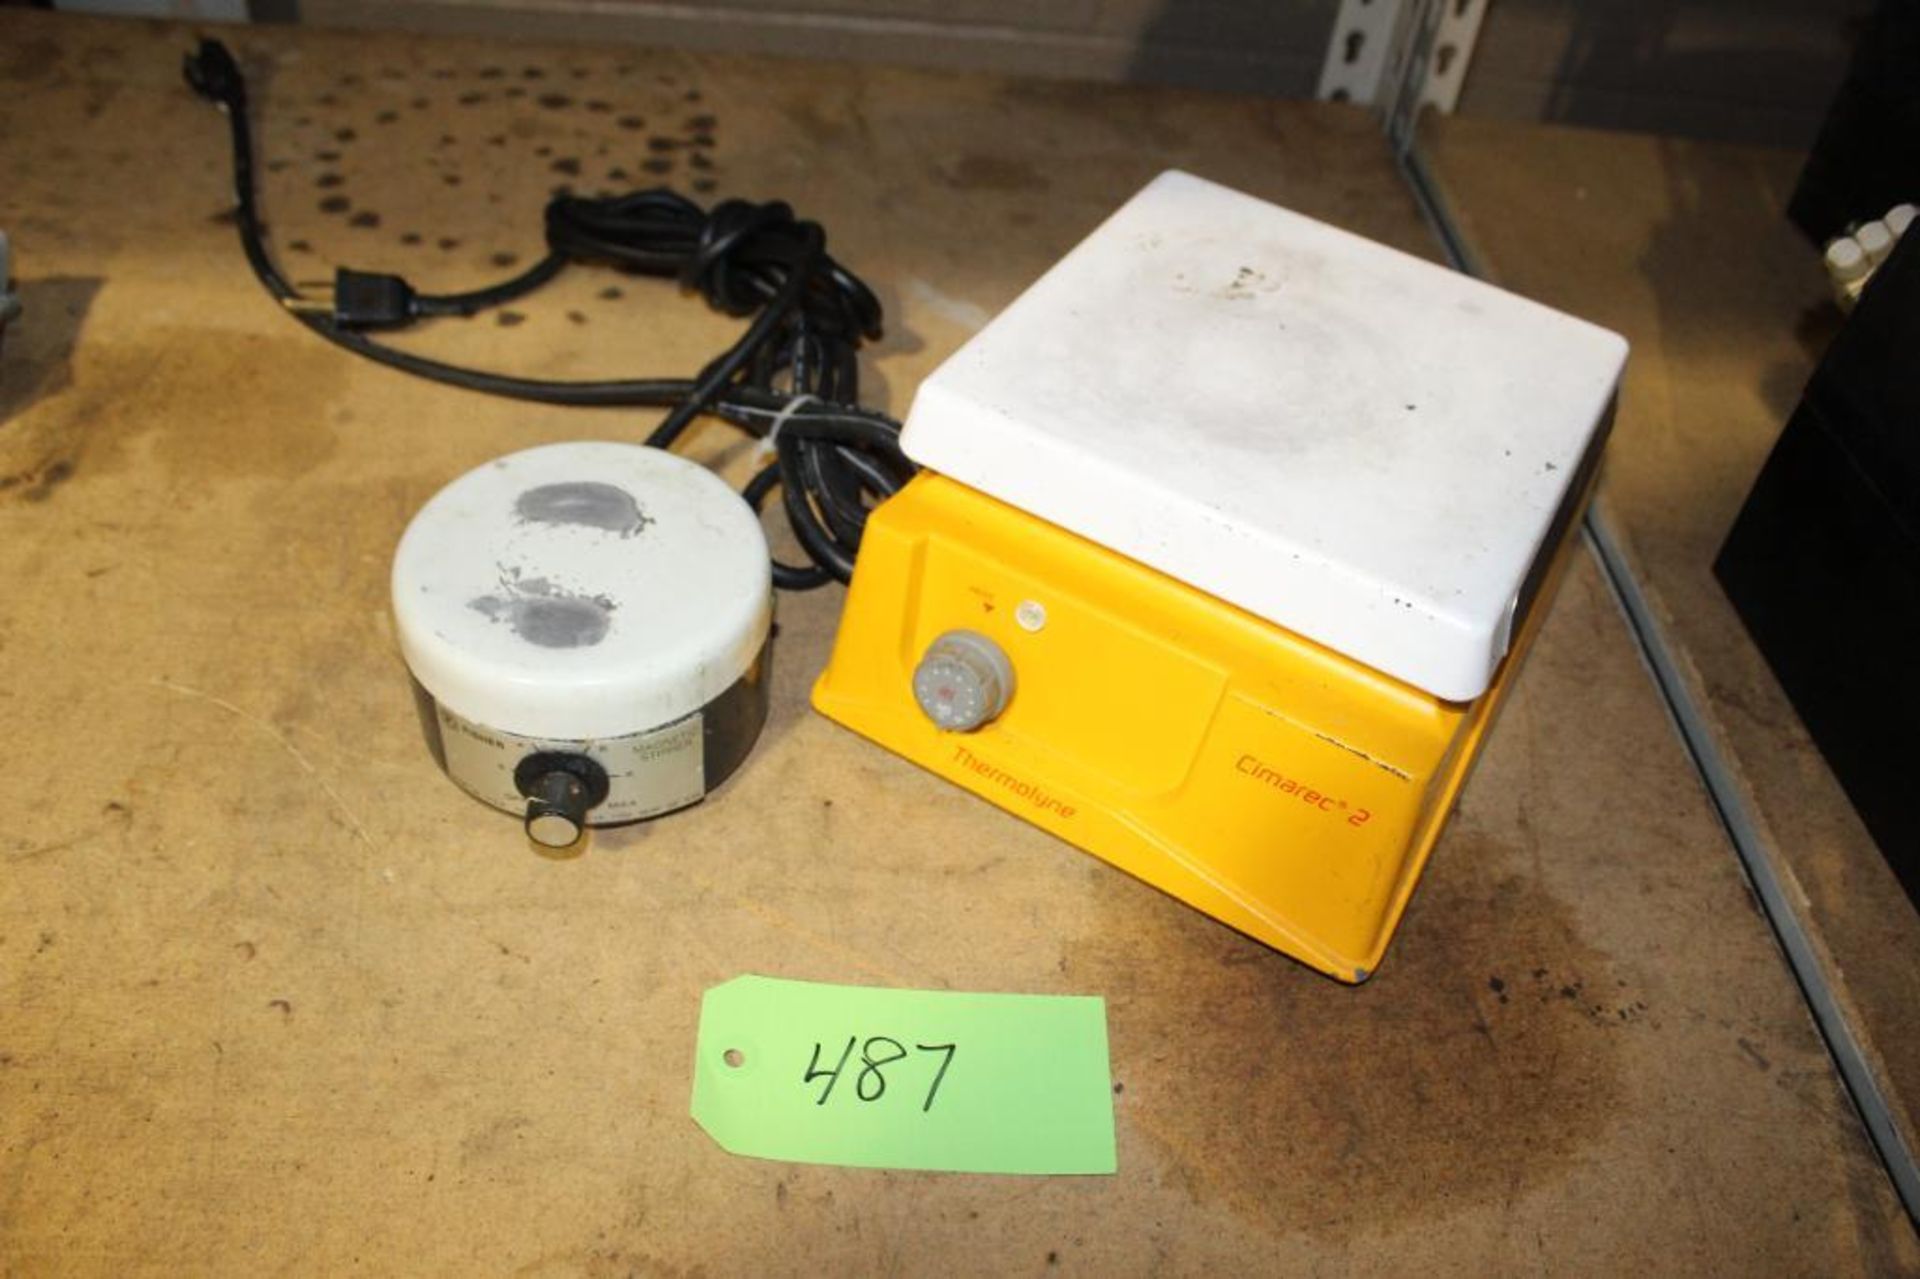 Thermolyne Cimarec 2 Heated Magnetic Stirrer Model HP46825 and Fisher Magent Stirrer 14-511-1A - Image 6 of 6